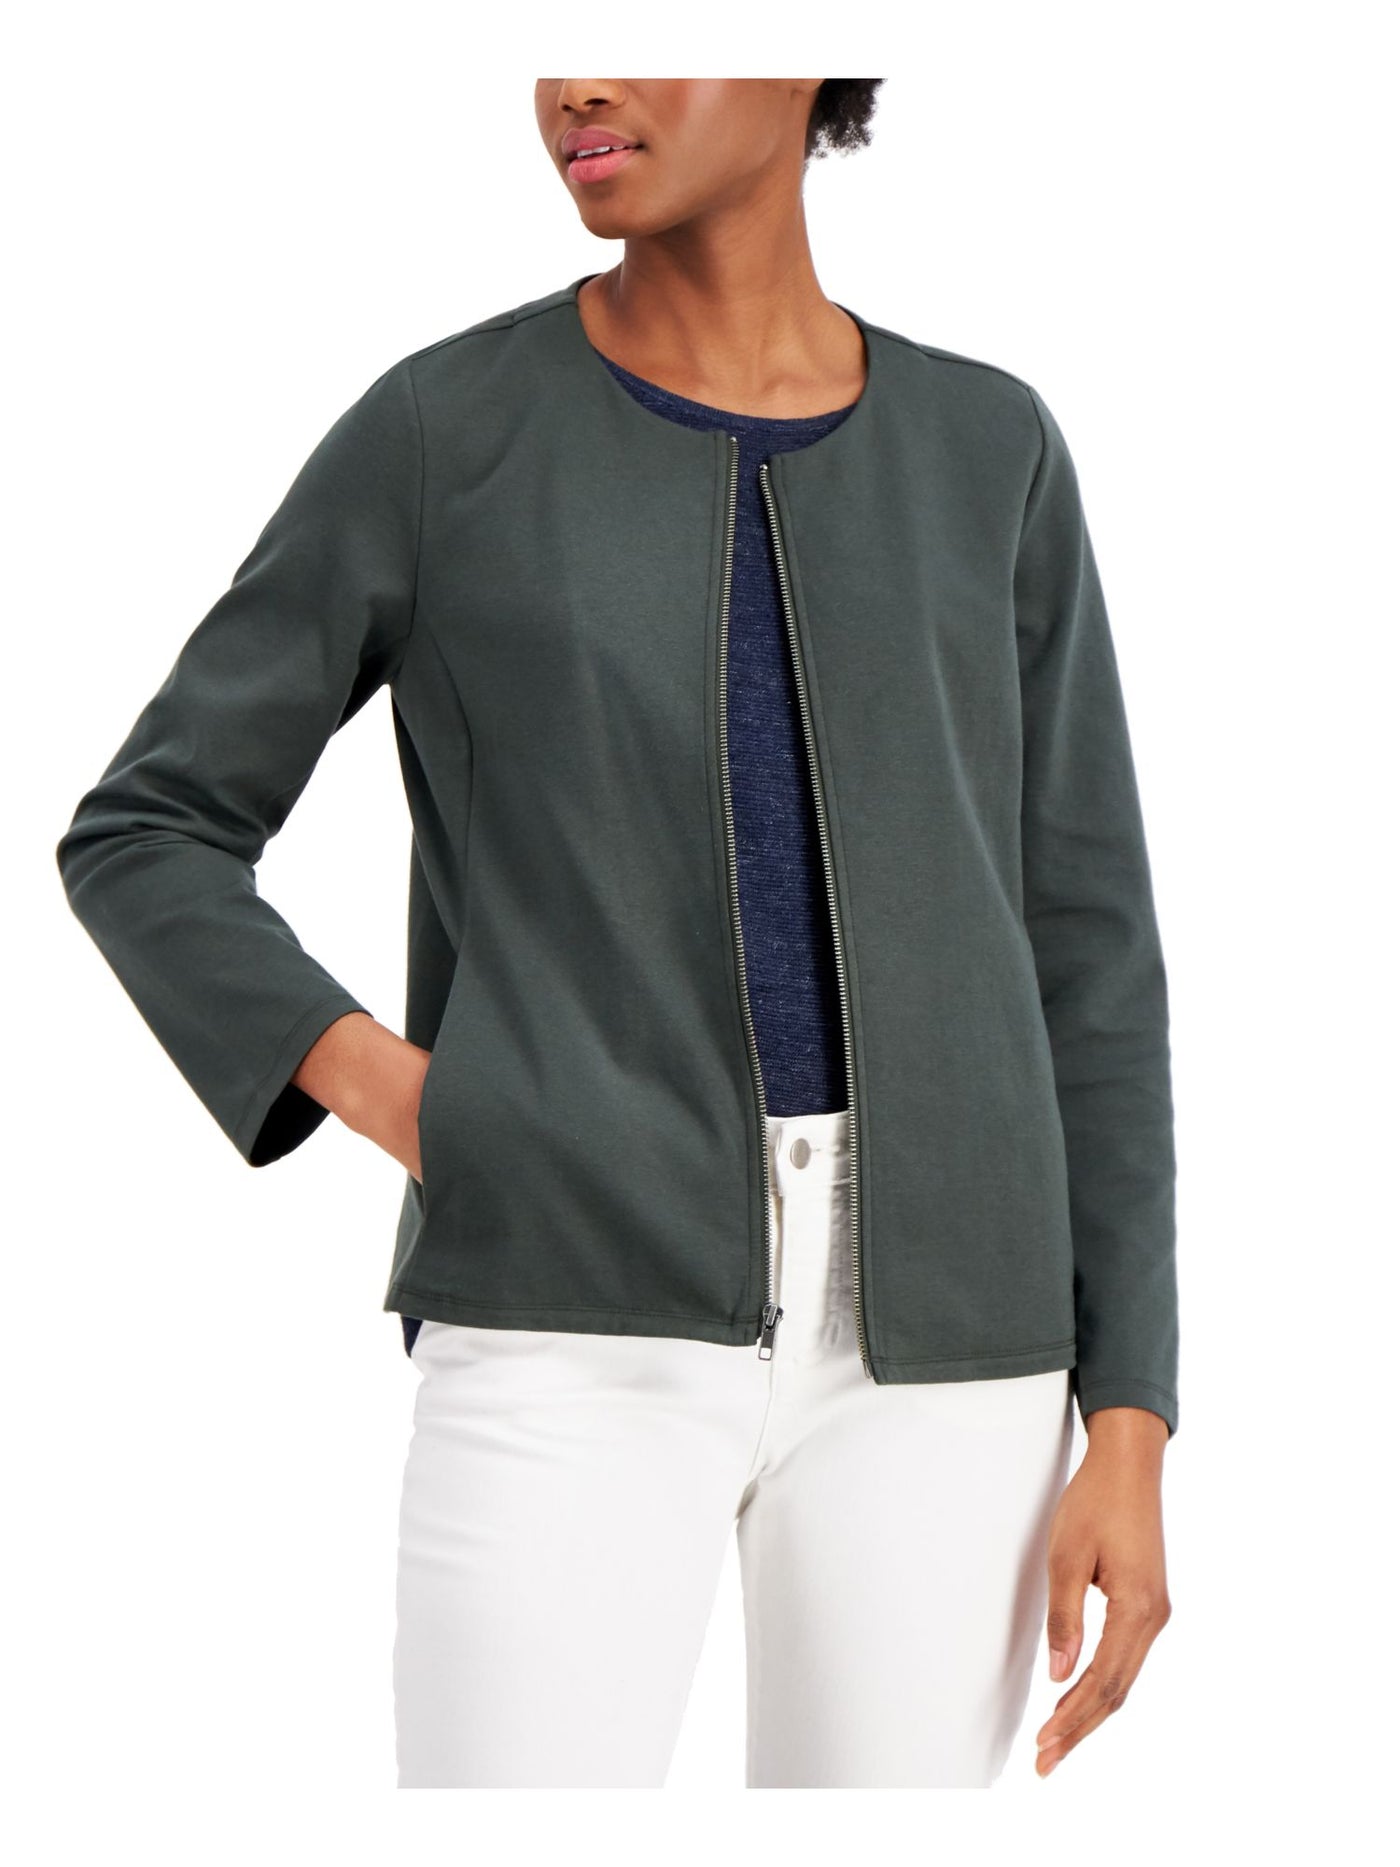 EILEEN FISHER Womens Green Pocketed Long Sleeve Zip Up Jacket XL